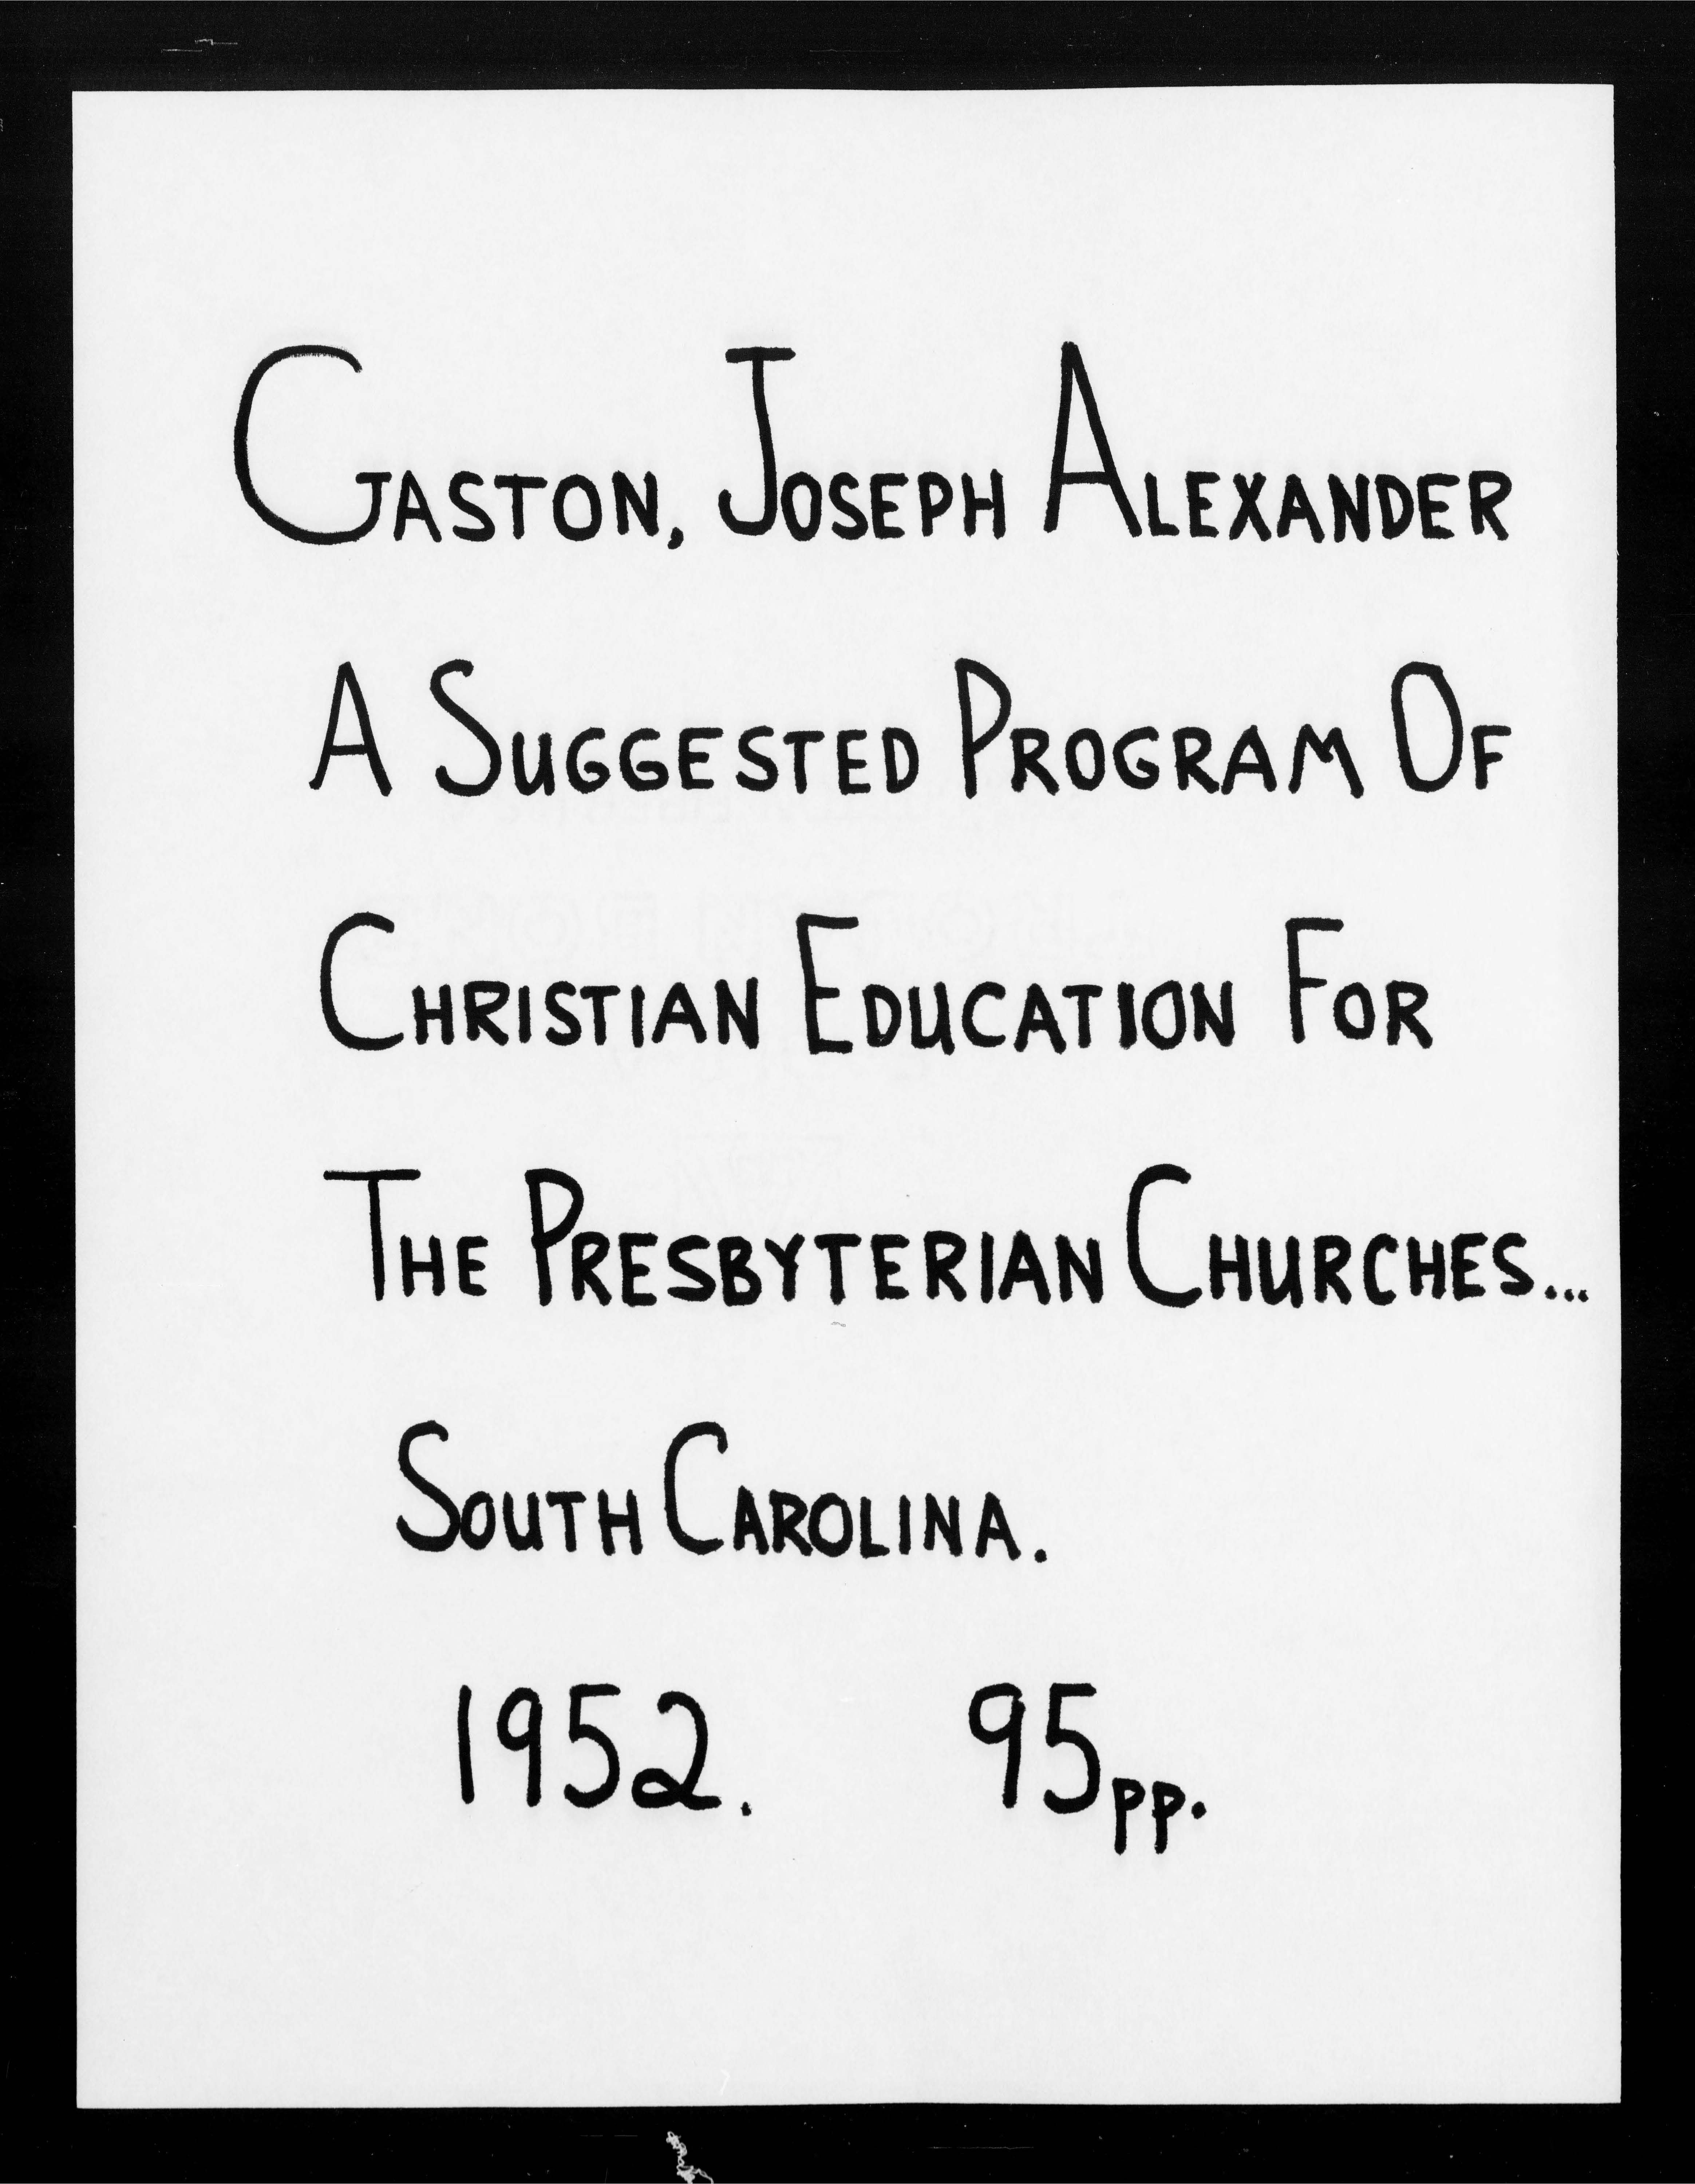 A Suggested Program of Christian Education for the Presbyterian Churches of the Proposed Fairfield Larger Parish, Fairfield County, South Carolina.